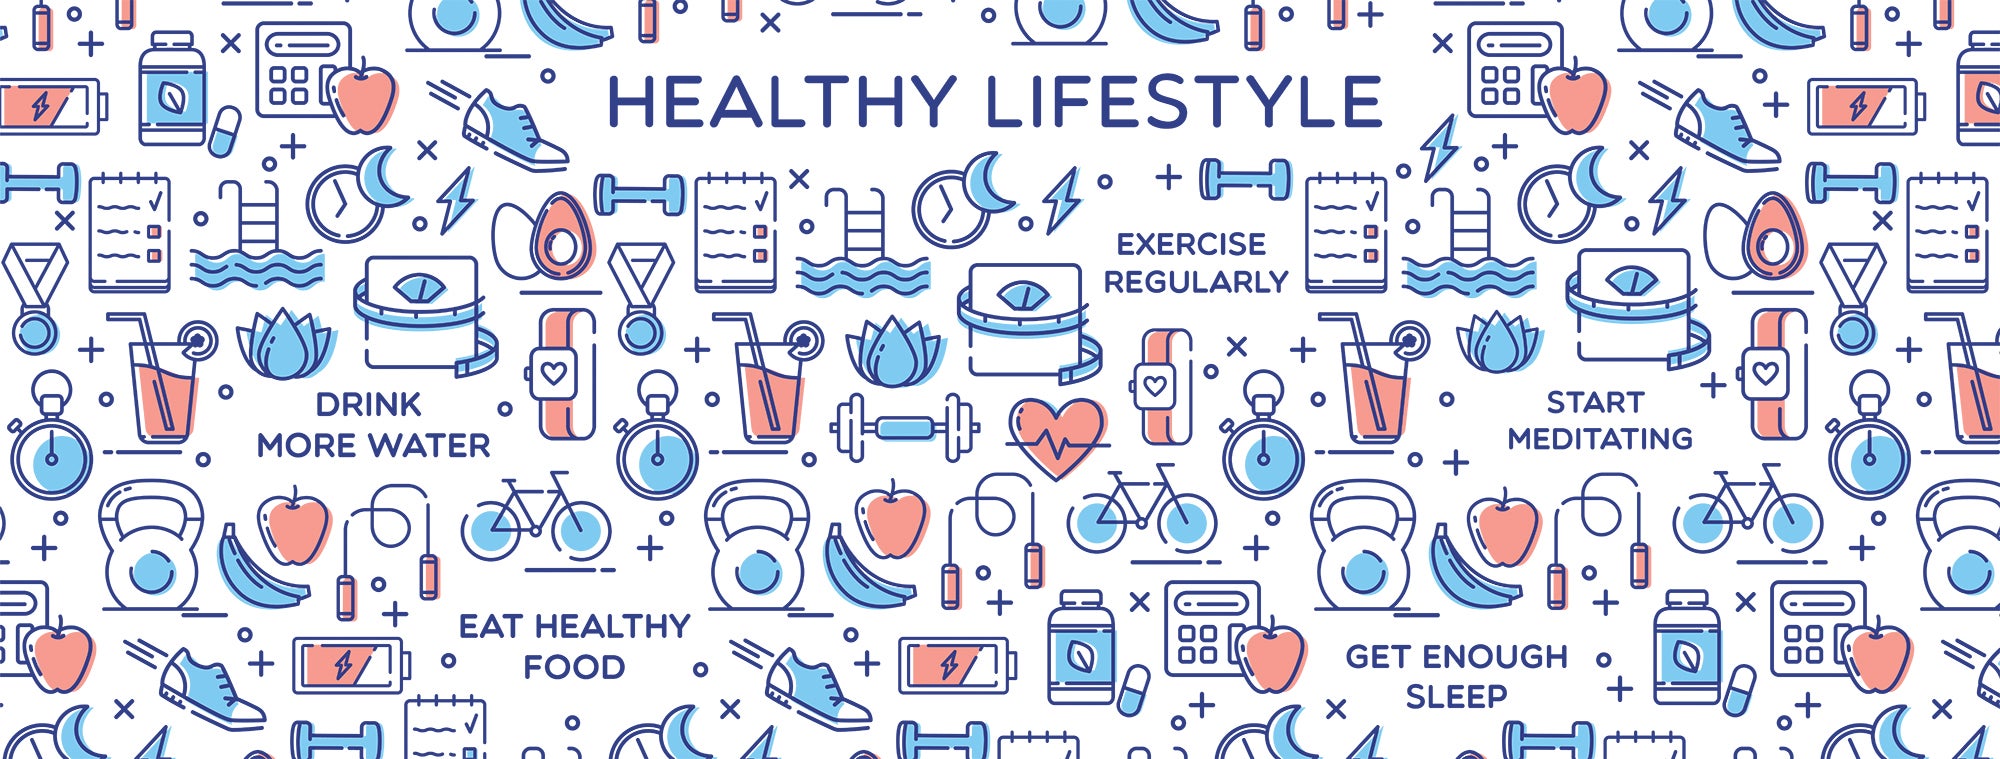 Healthy Lifestyle graphic